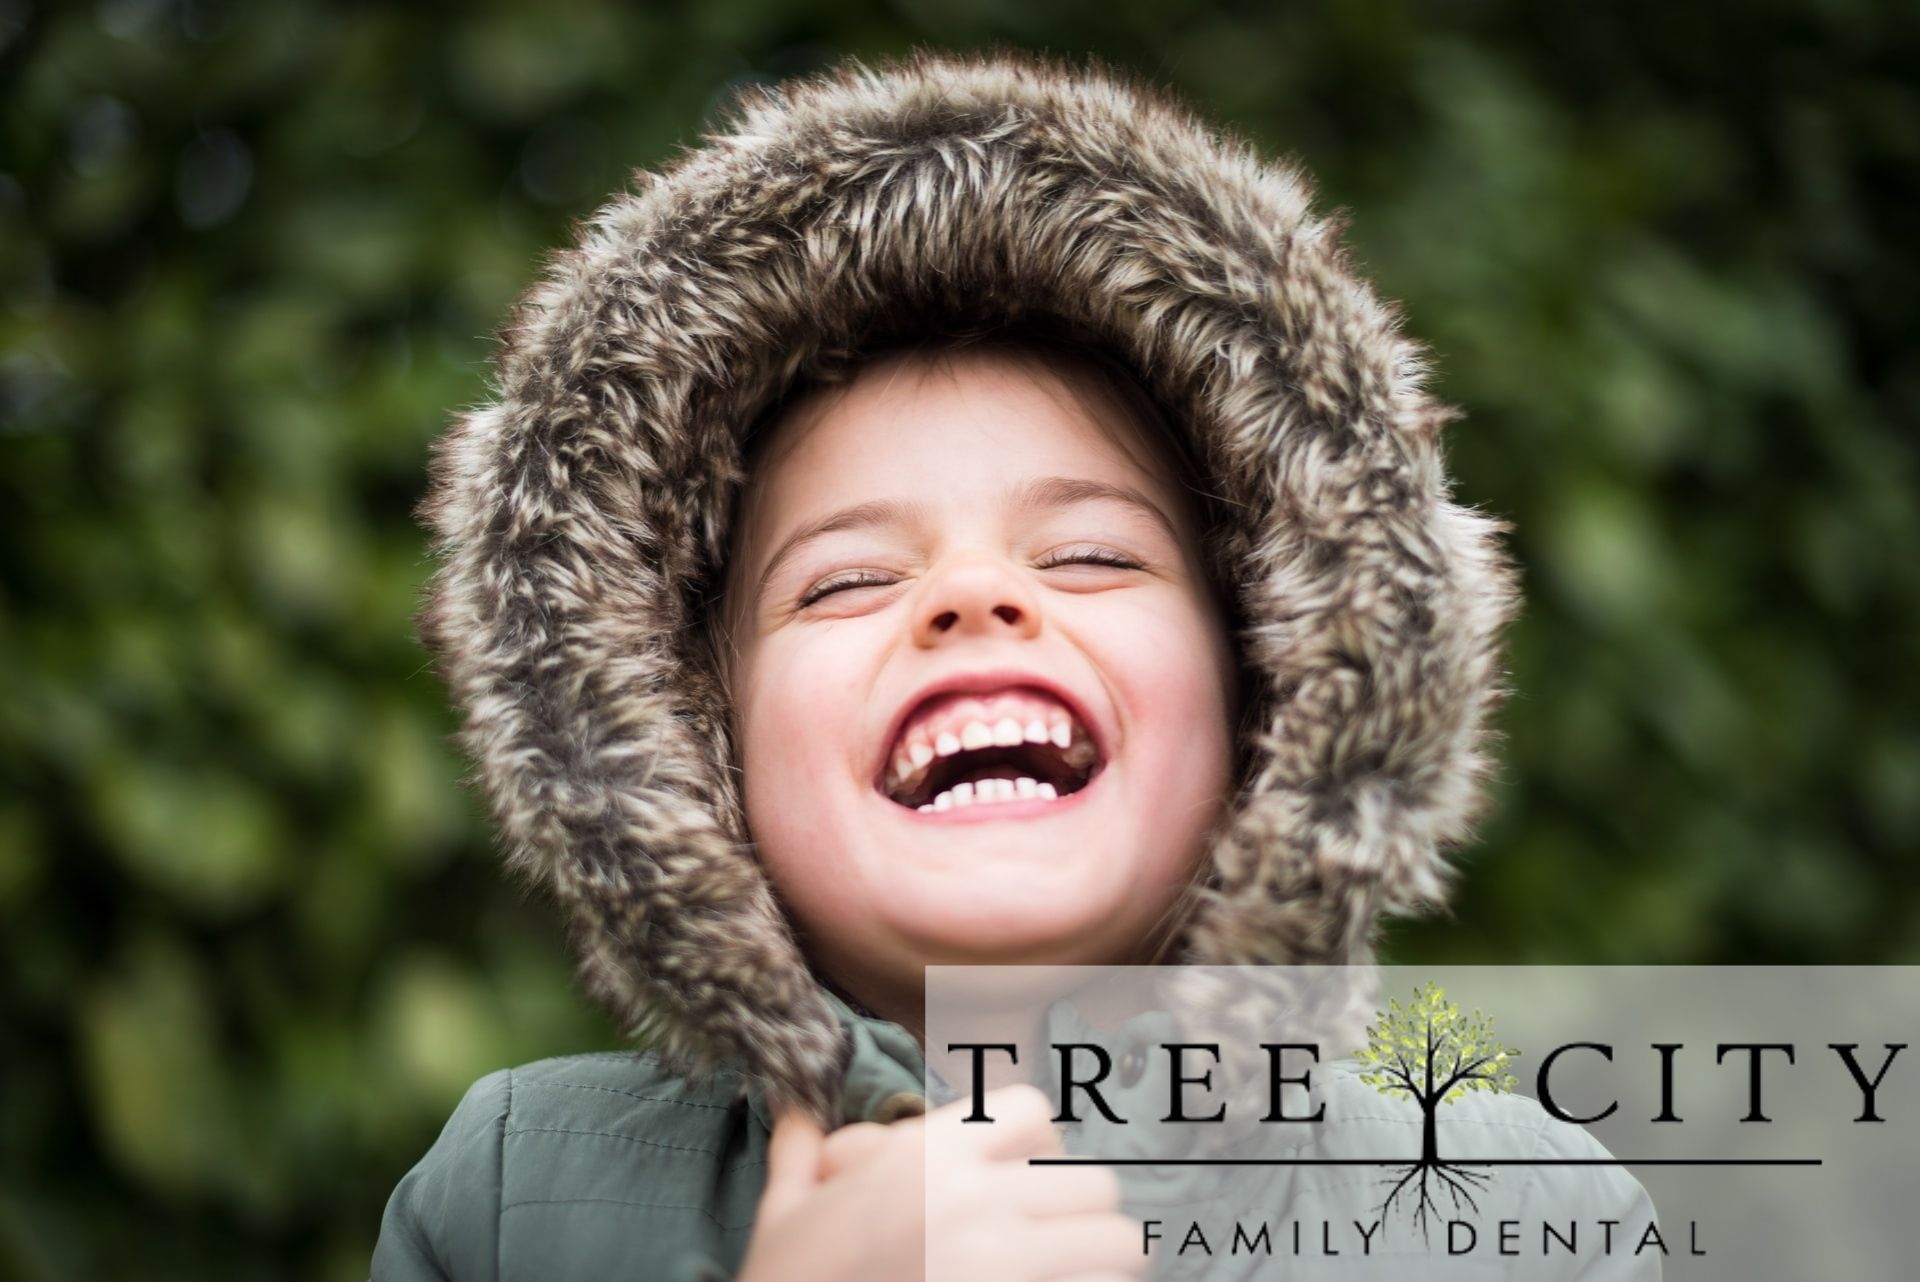 Kid laughing in a fur jacket